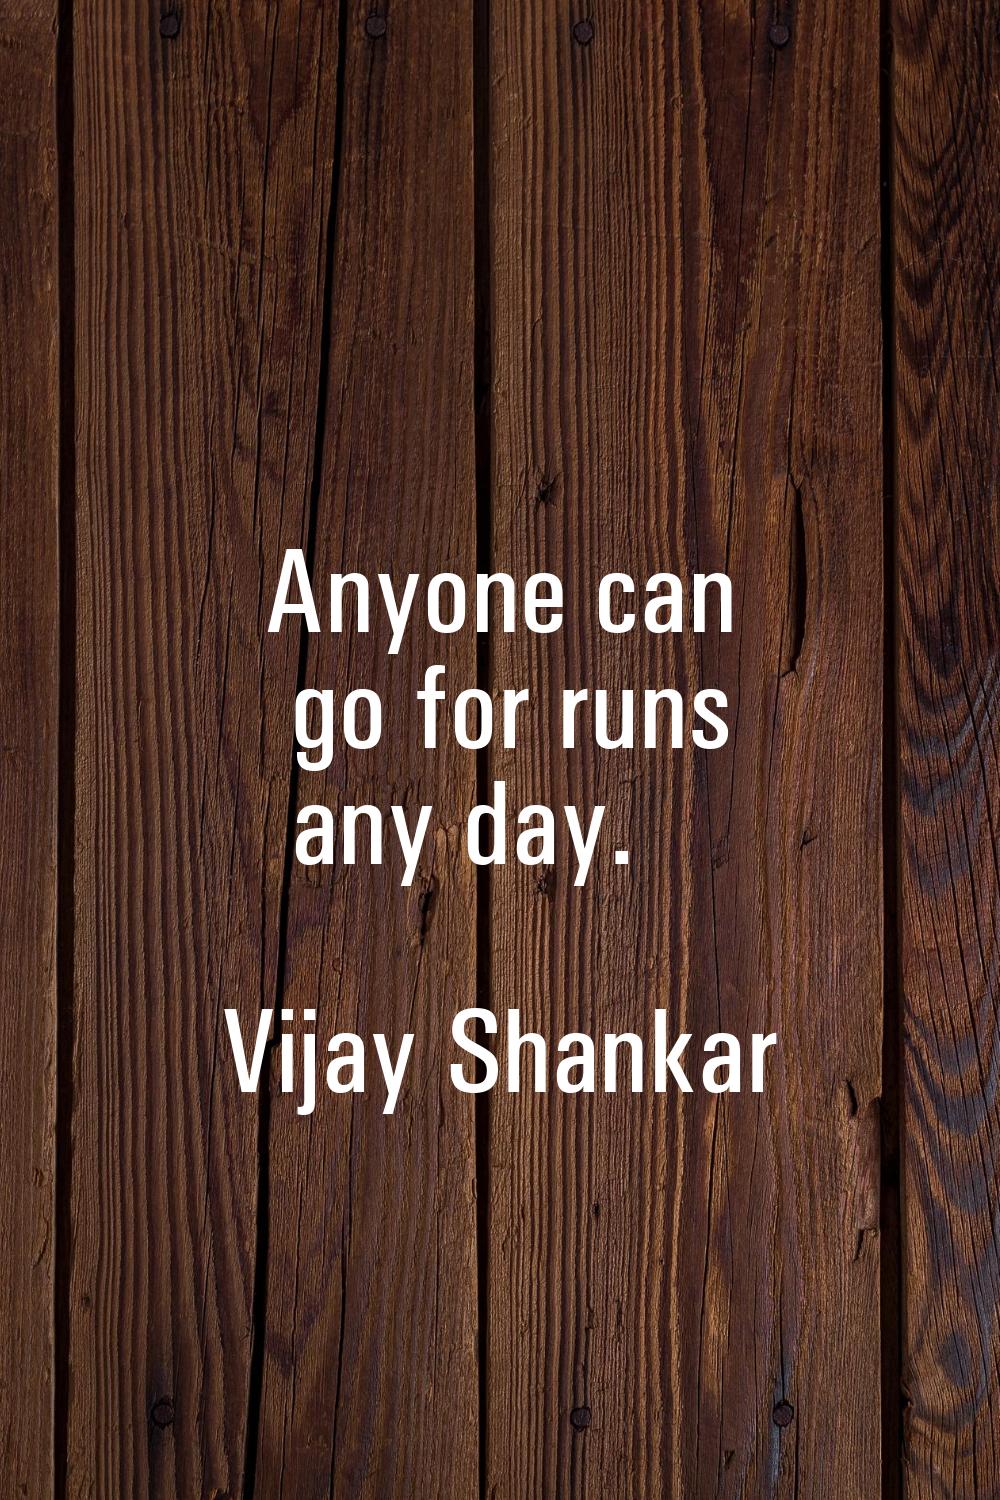 Anyone can go for runs any day.